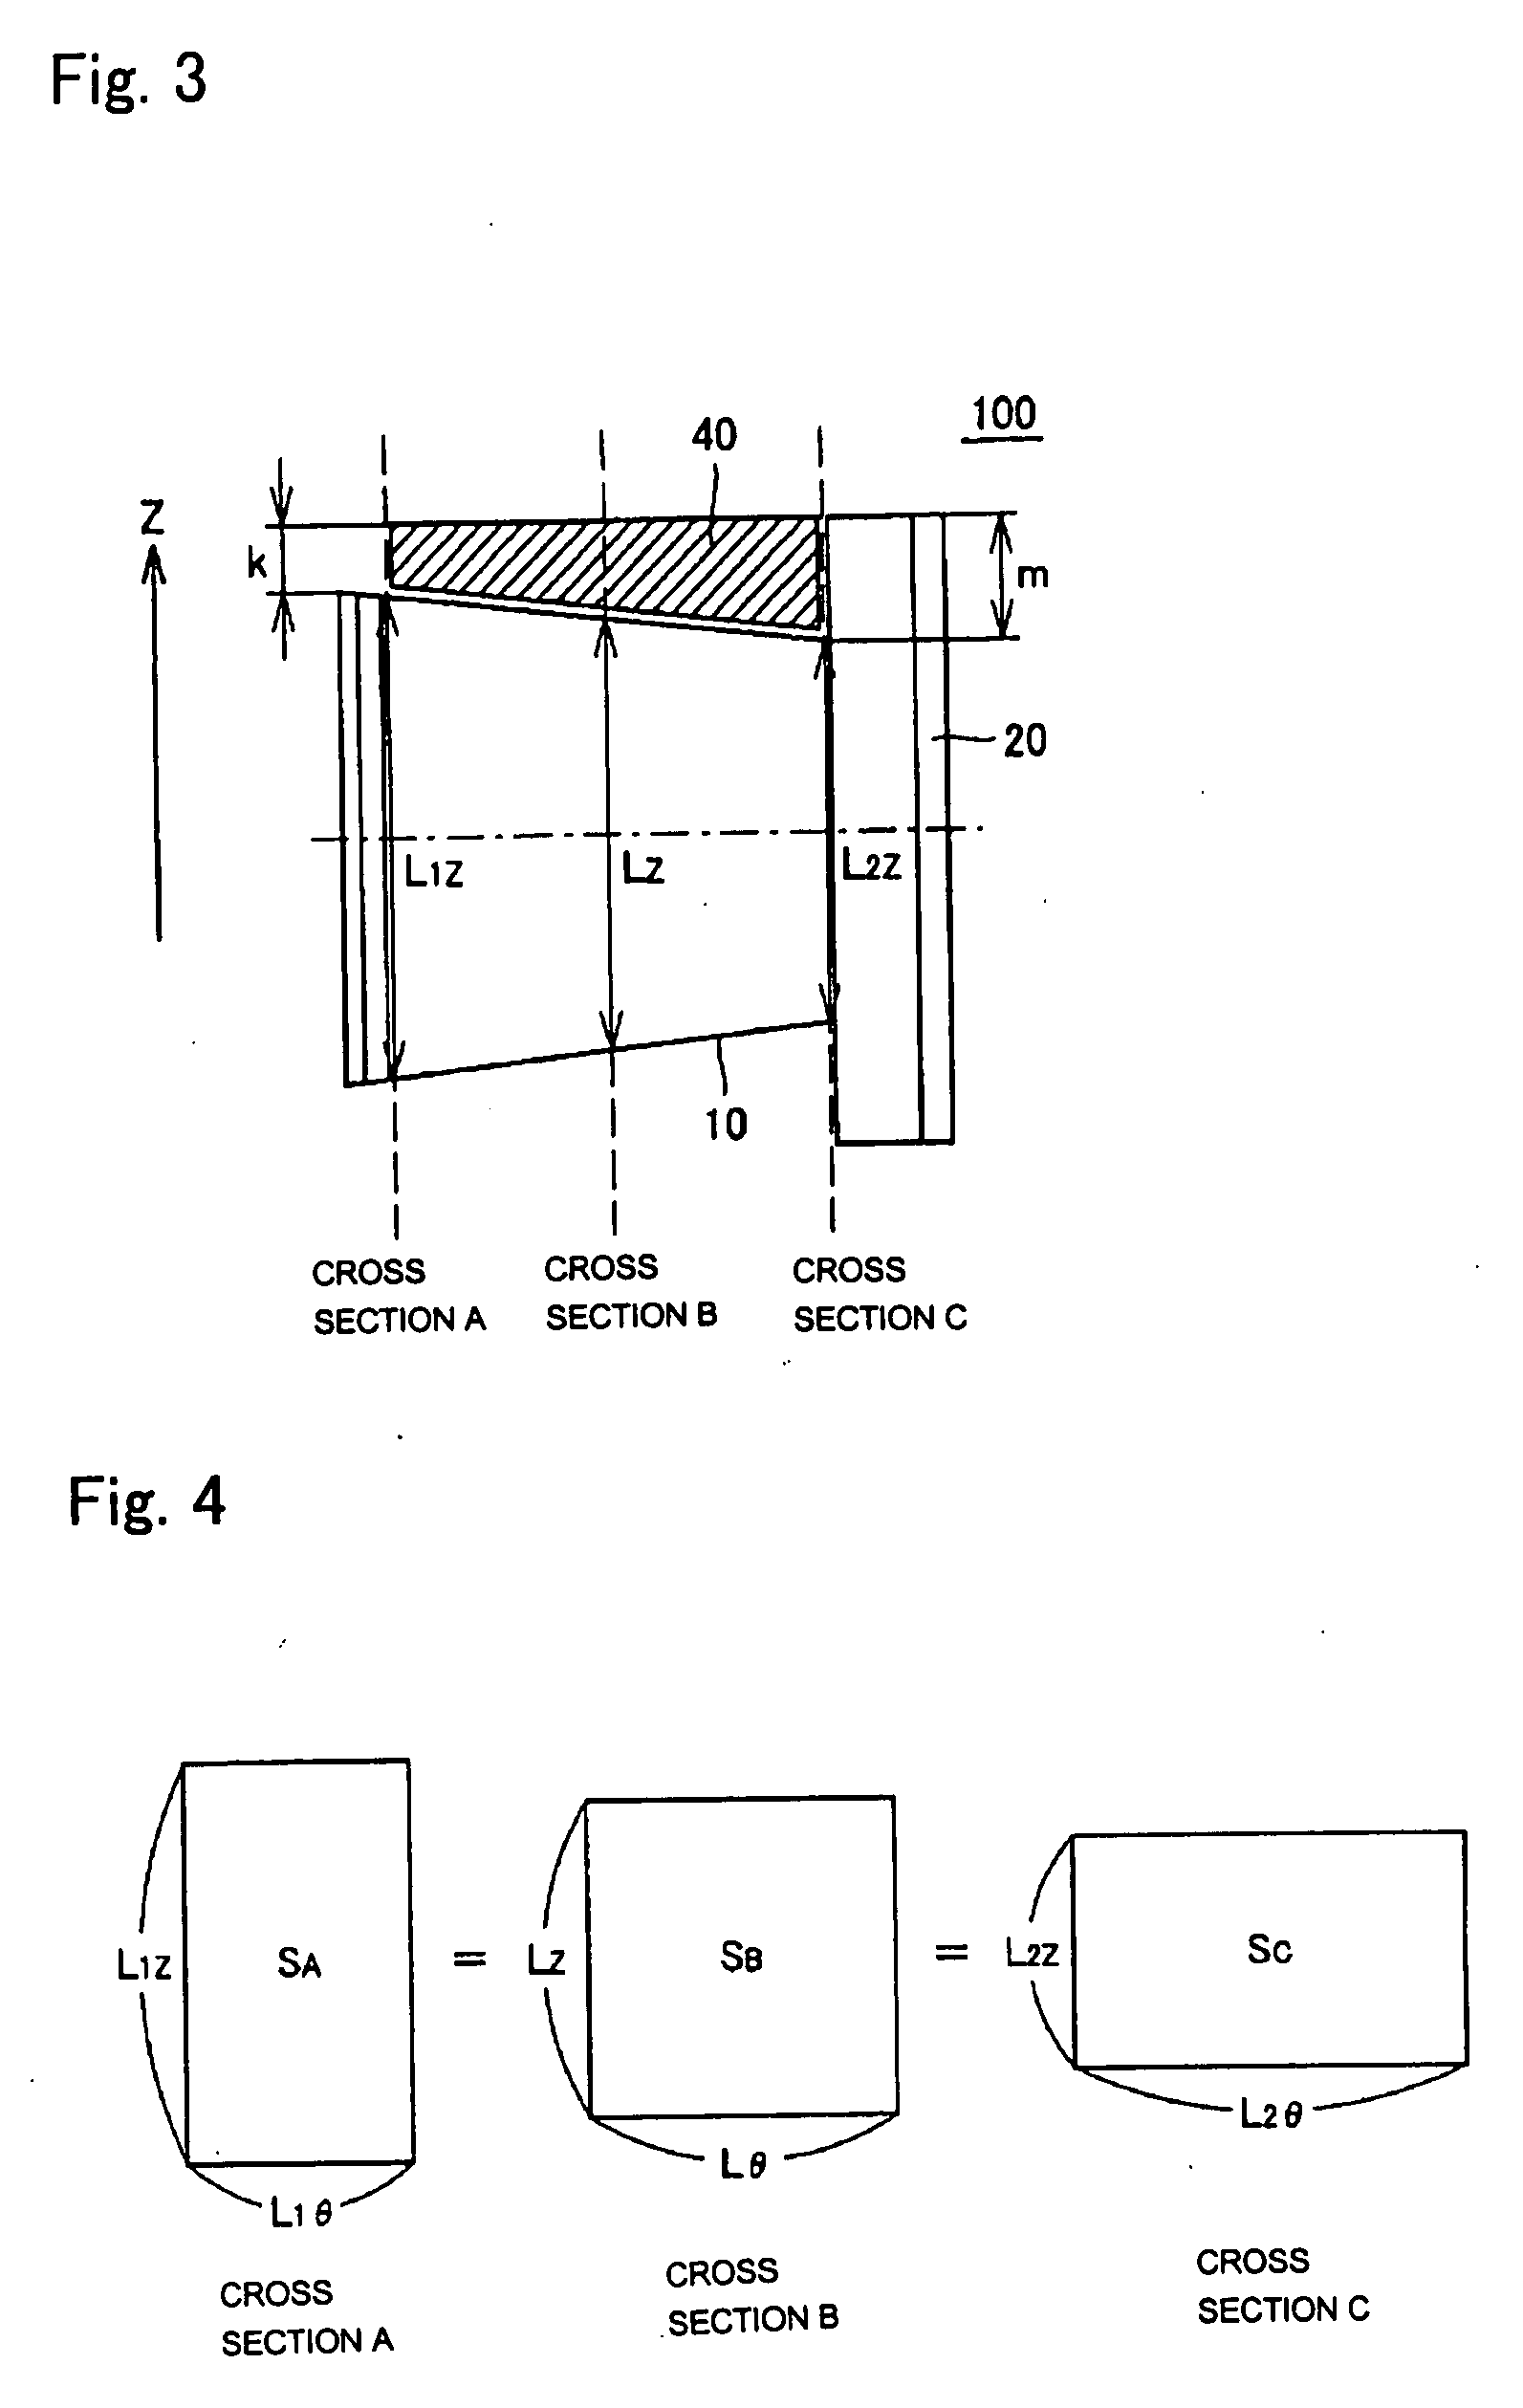 Motor Generator and Automobile Carrying the Same